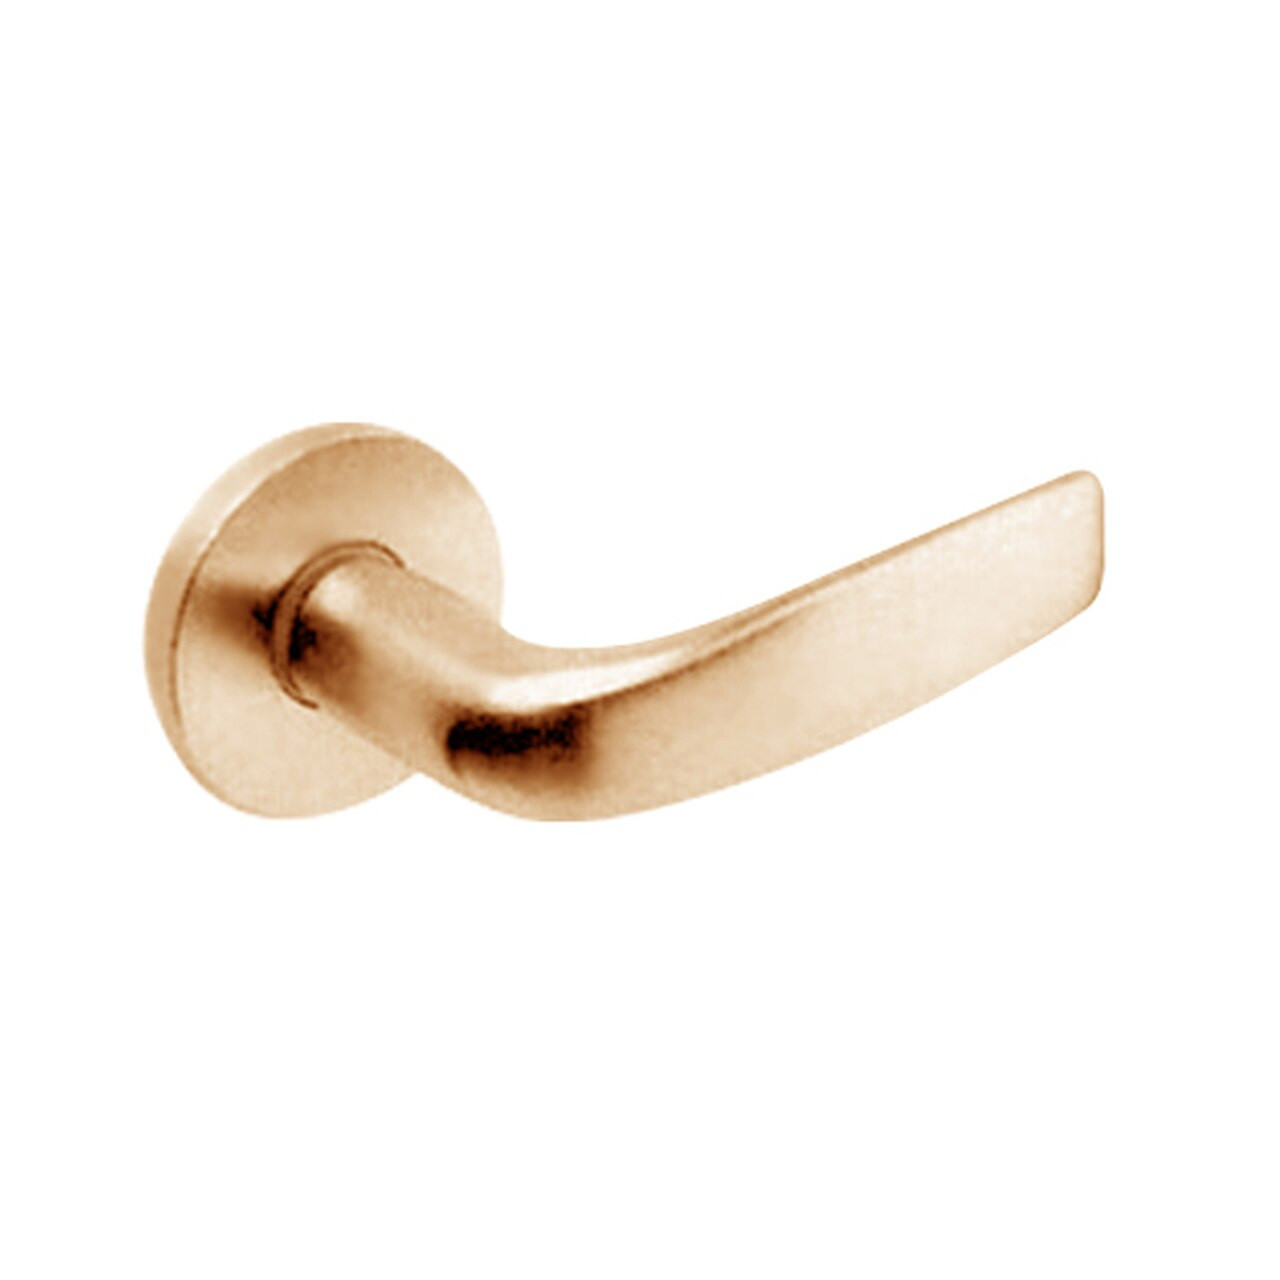 ML2067-CSB-612-LC Corbin Russwin ML2000 Series Mortise Apartment Locksets with Citation Lever in Satin Bronze